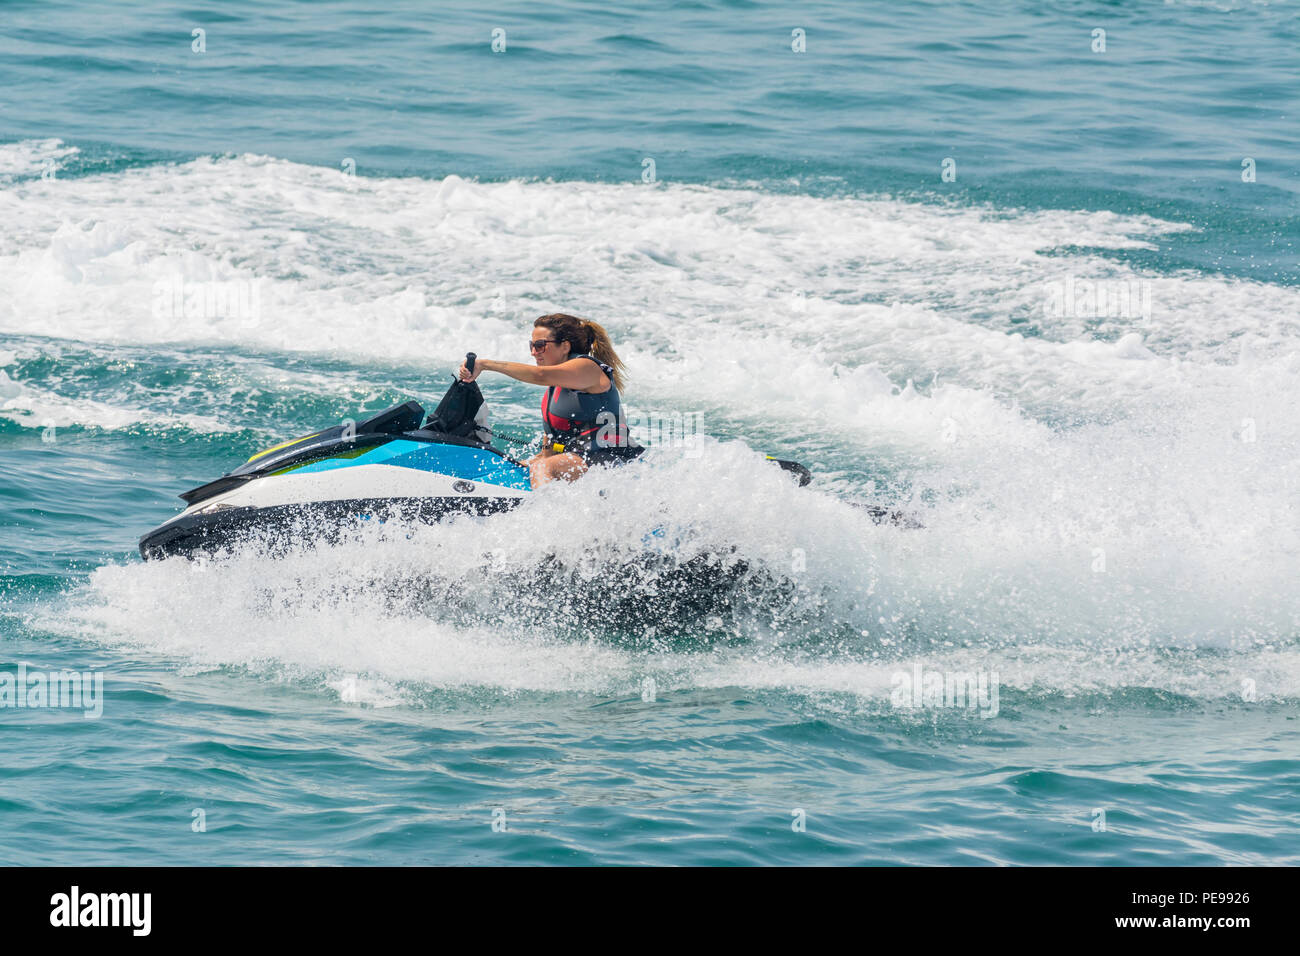 Woman riding a jet ski on the sea in Summer in the UK. Jet skiing. Jet ski. Stock Photo